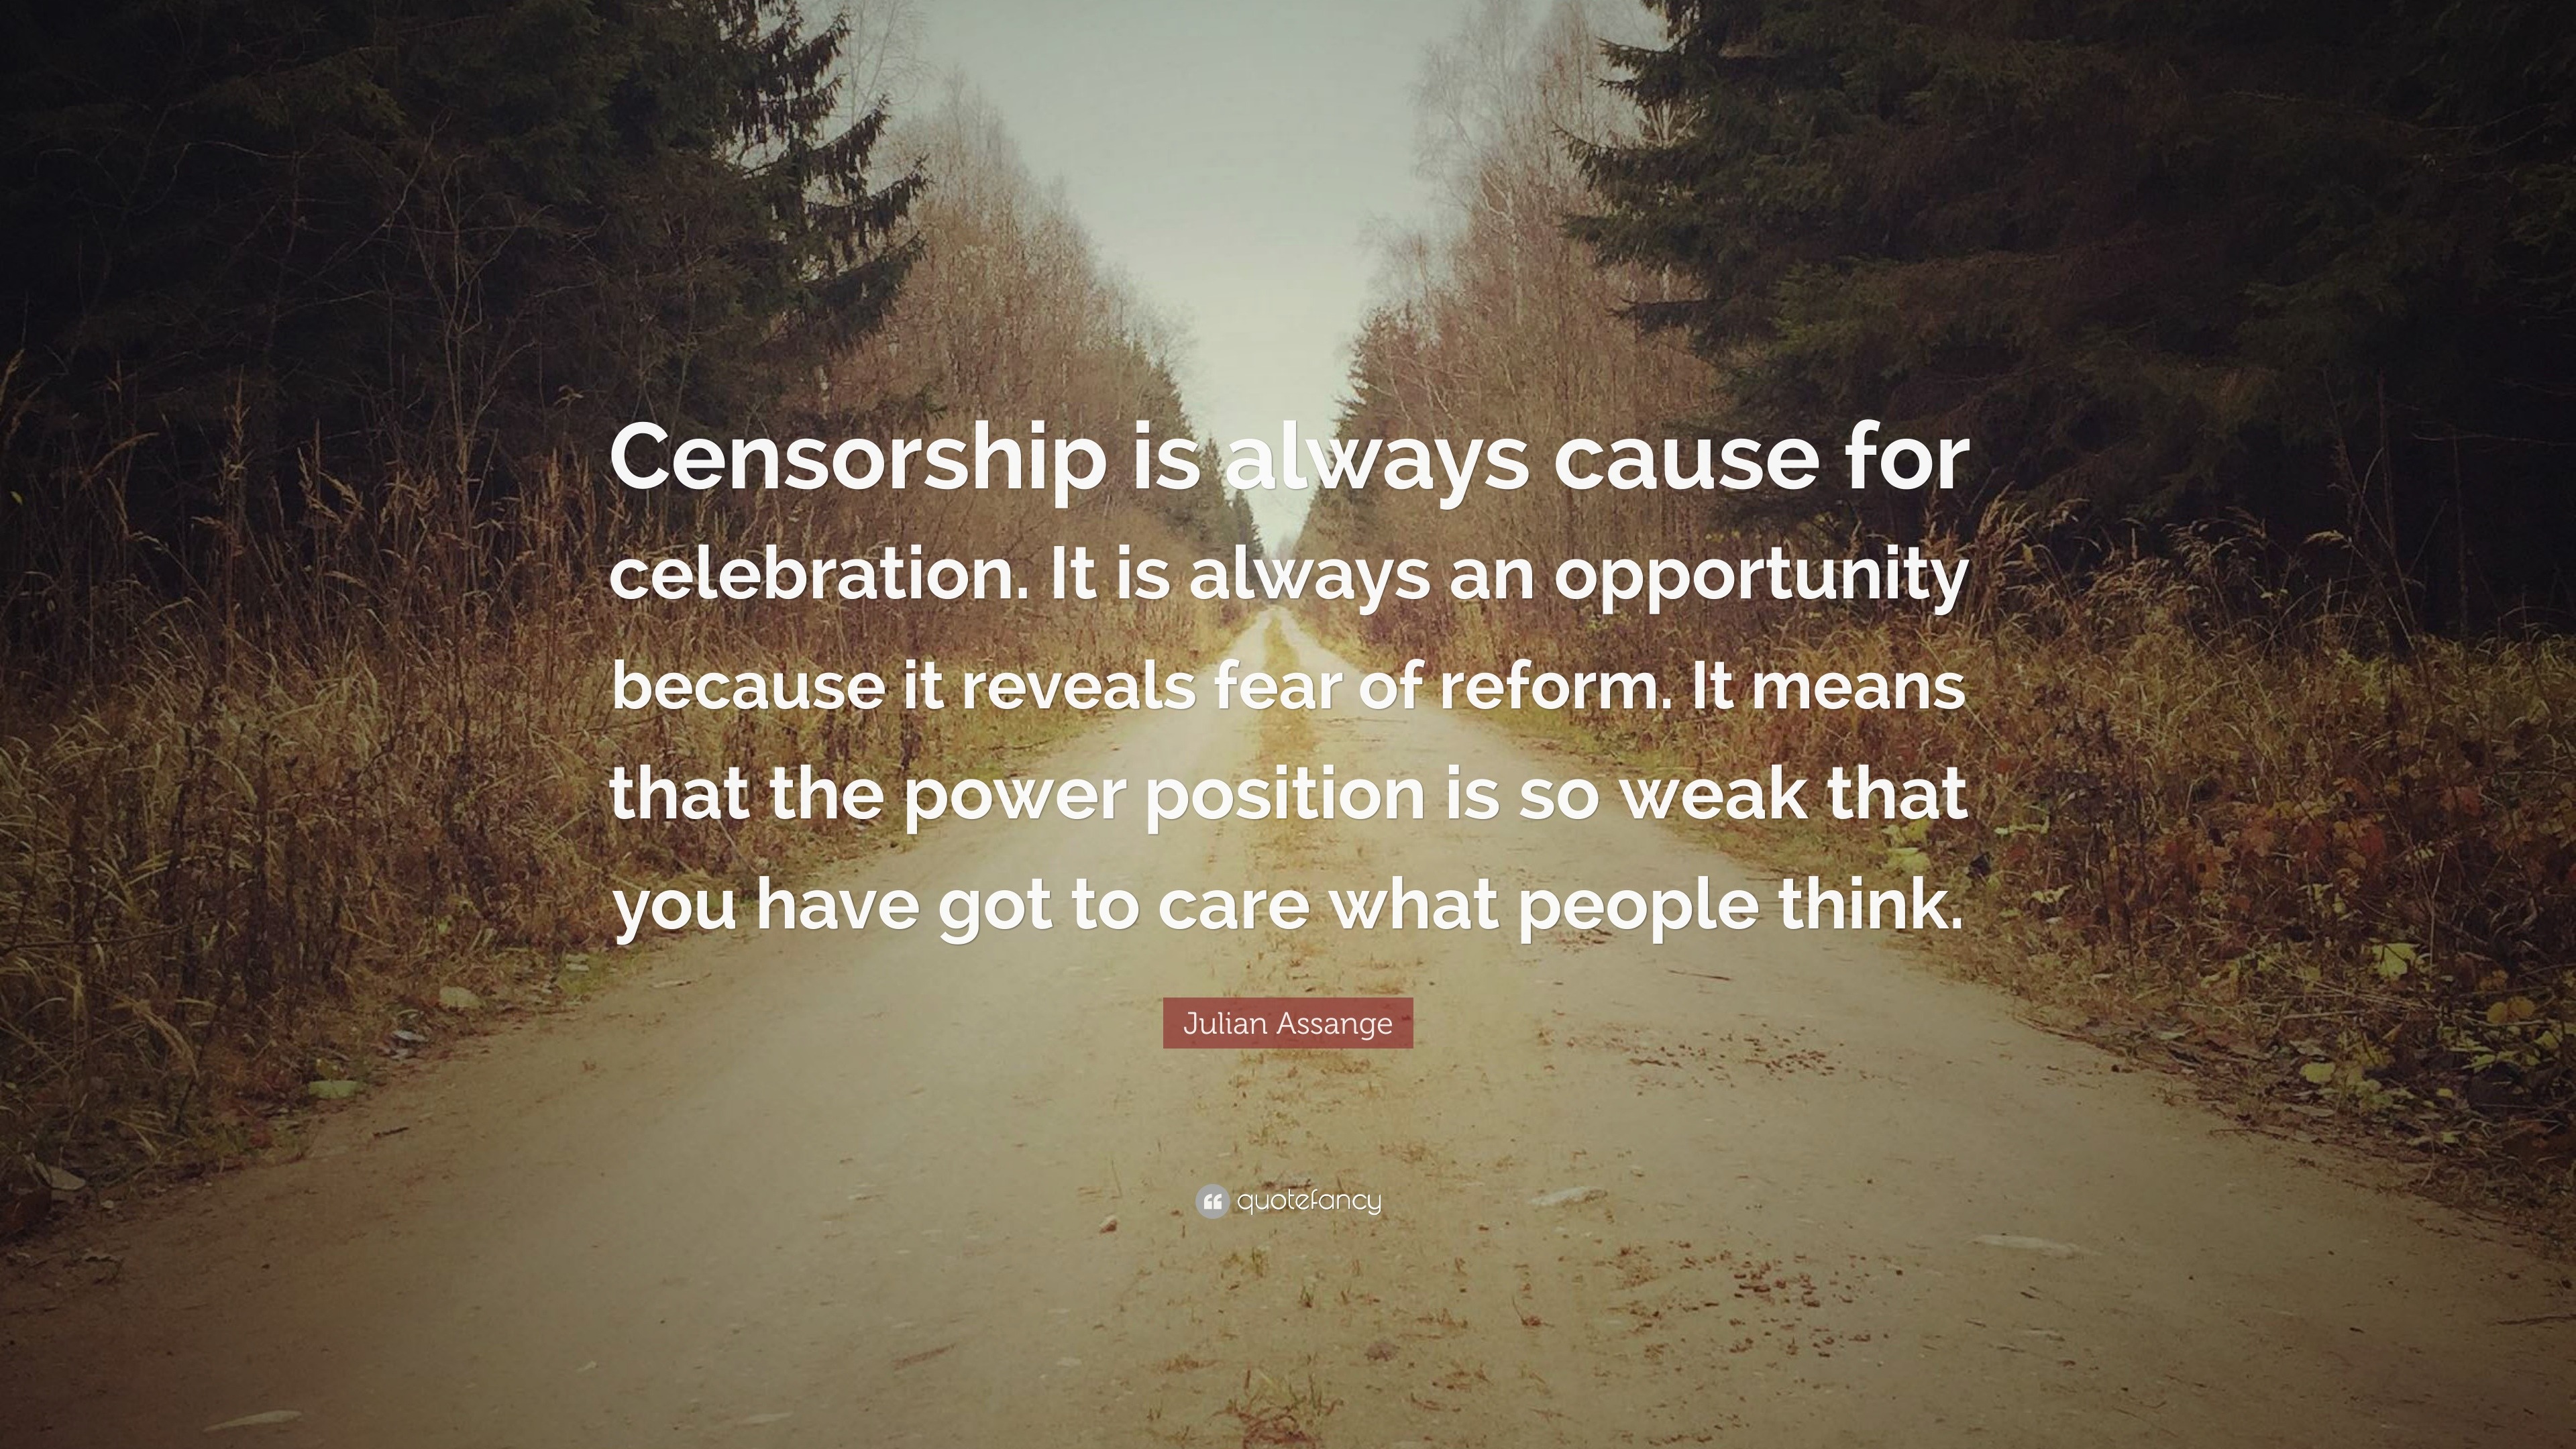 famous censorship quotes